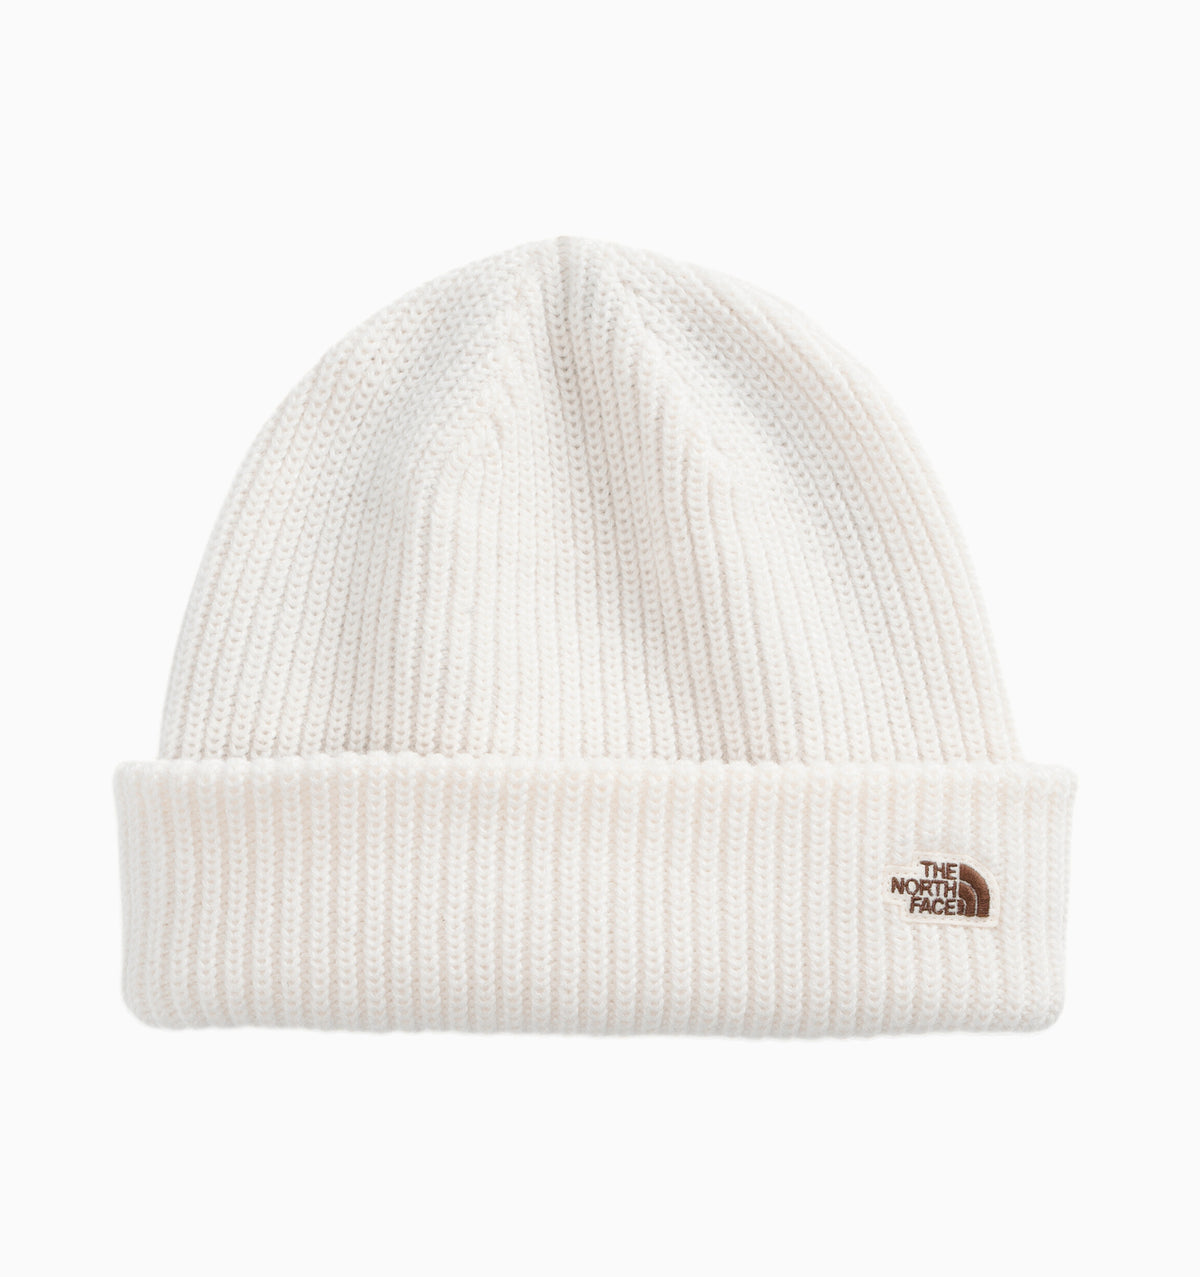 The North Face Salty Dog Beanie - White